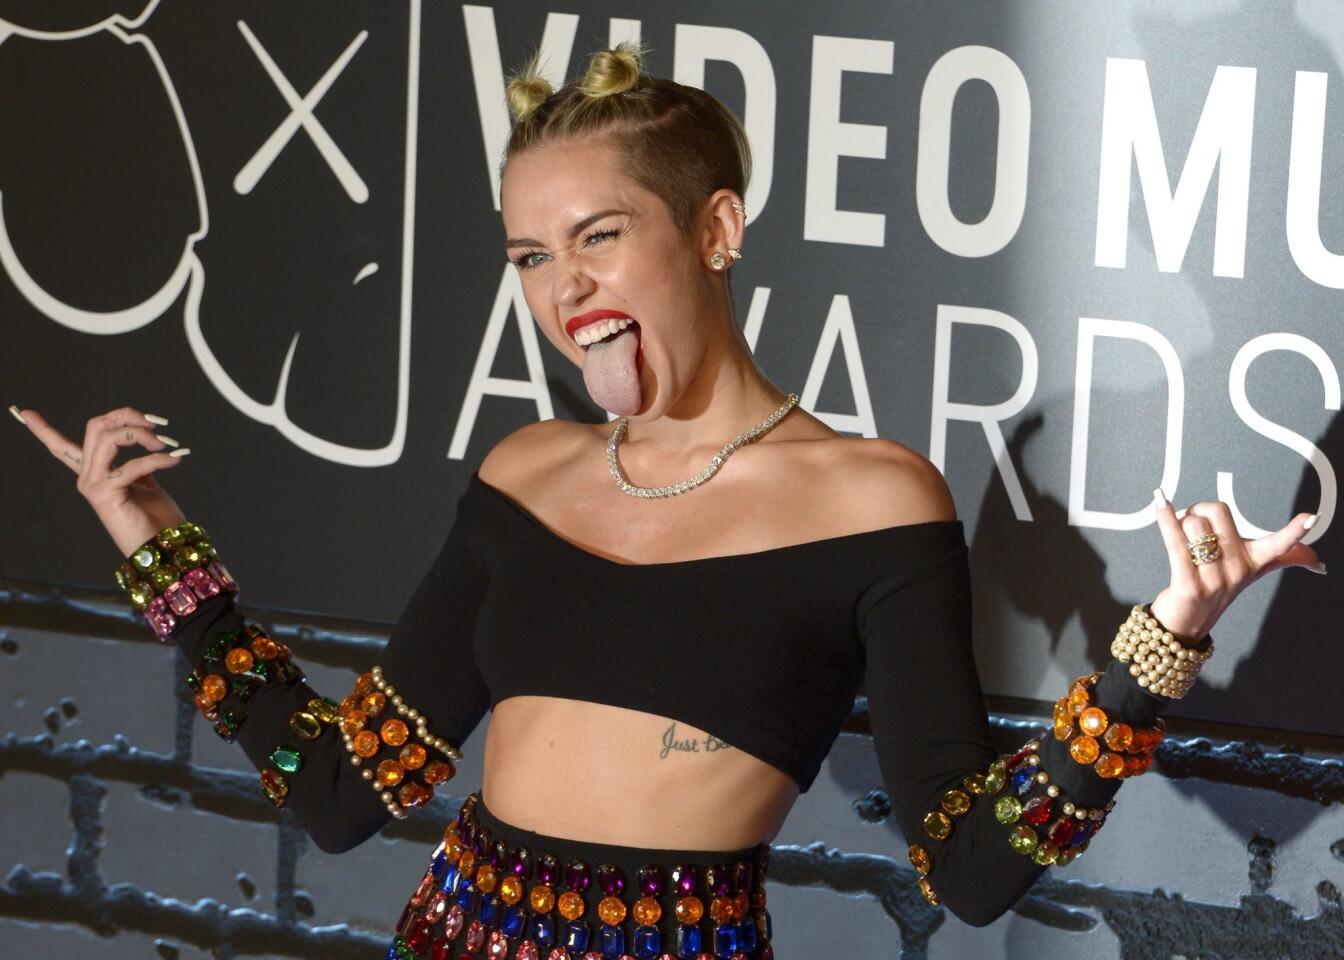 Miley Cyrus, who is hosting the MTV Video Music Awards this Sunday, is famous for her skimpy red carpet looks, such as this revealing midriff from the 2013 VMAs.